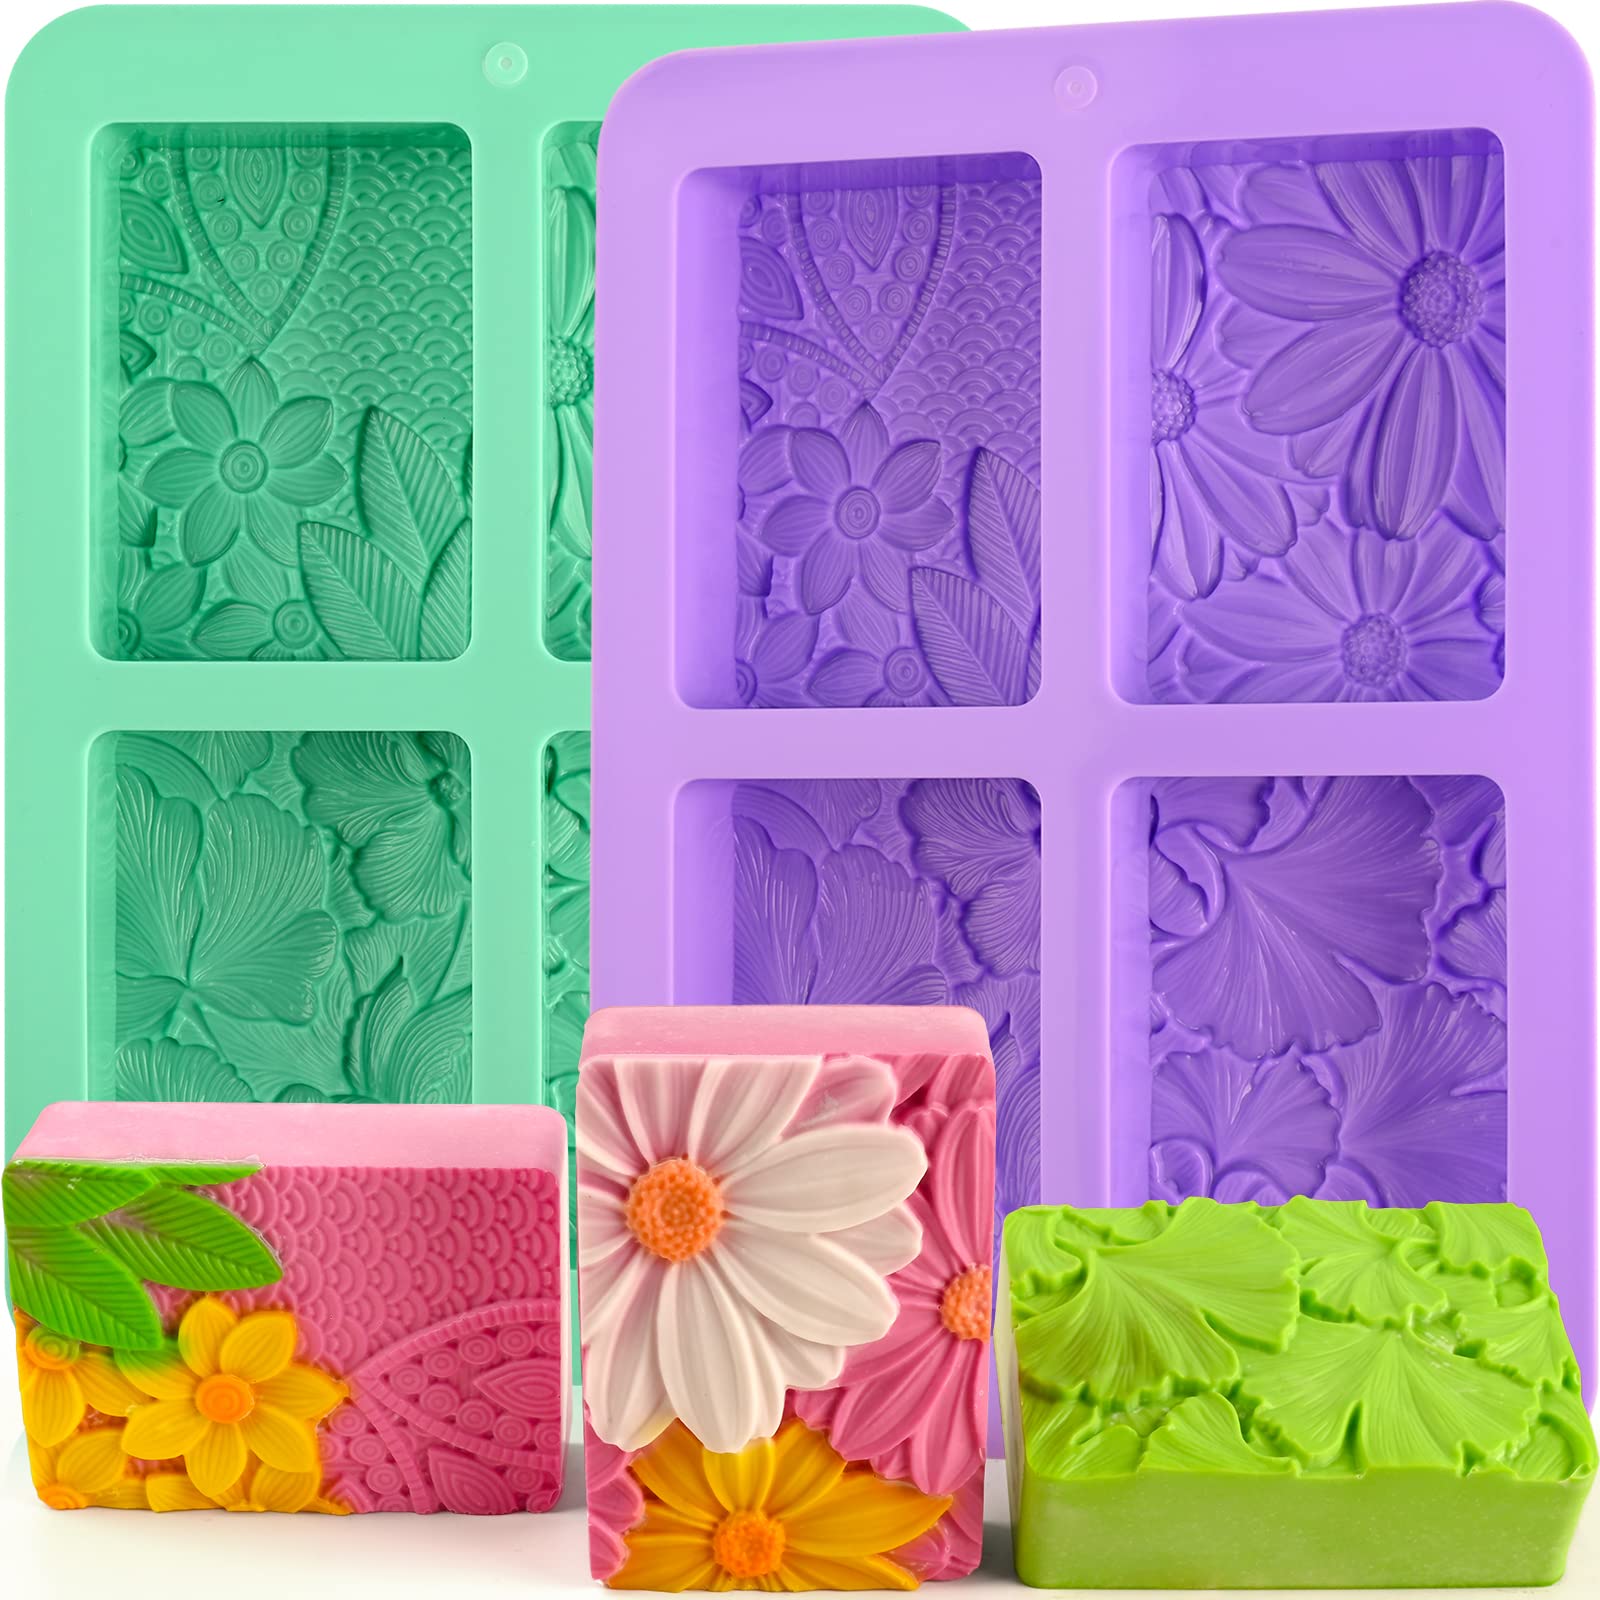 Rectangle Soap Bar Mold DIY Home Soap Making Small Soap Silicone Molds 40  Cavity